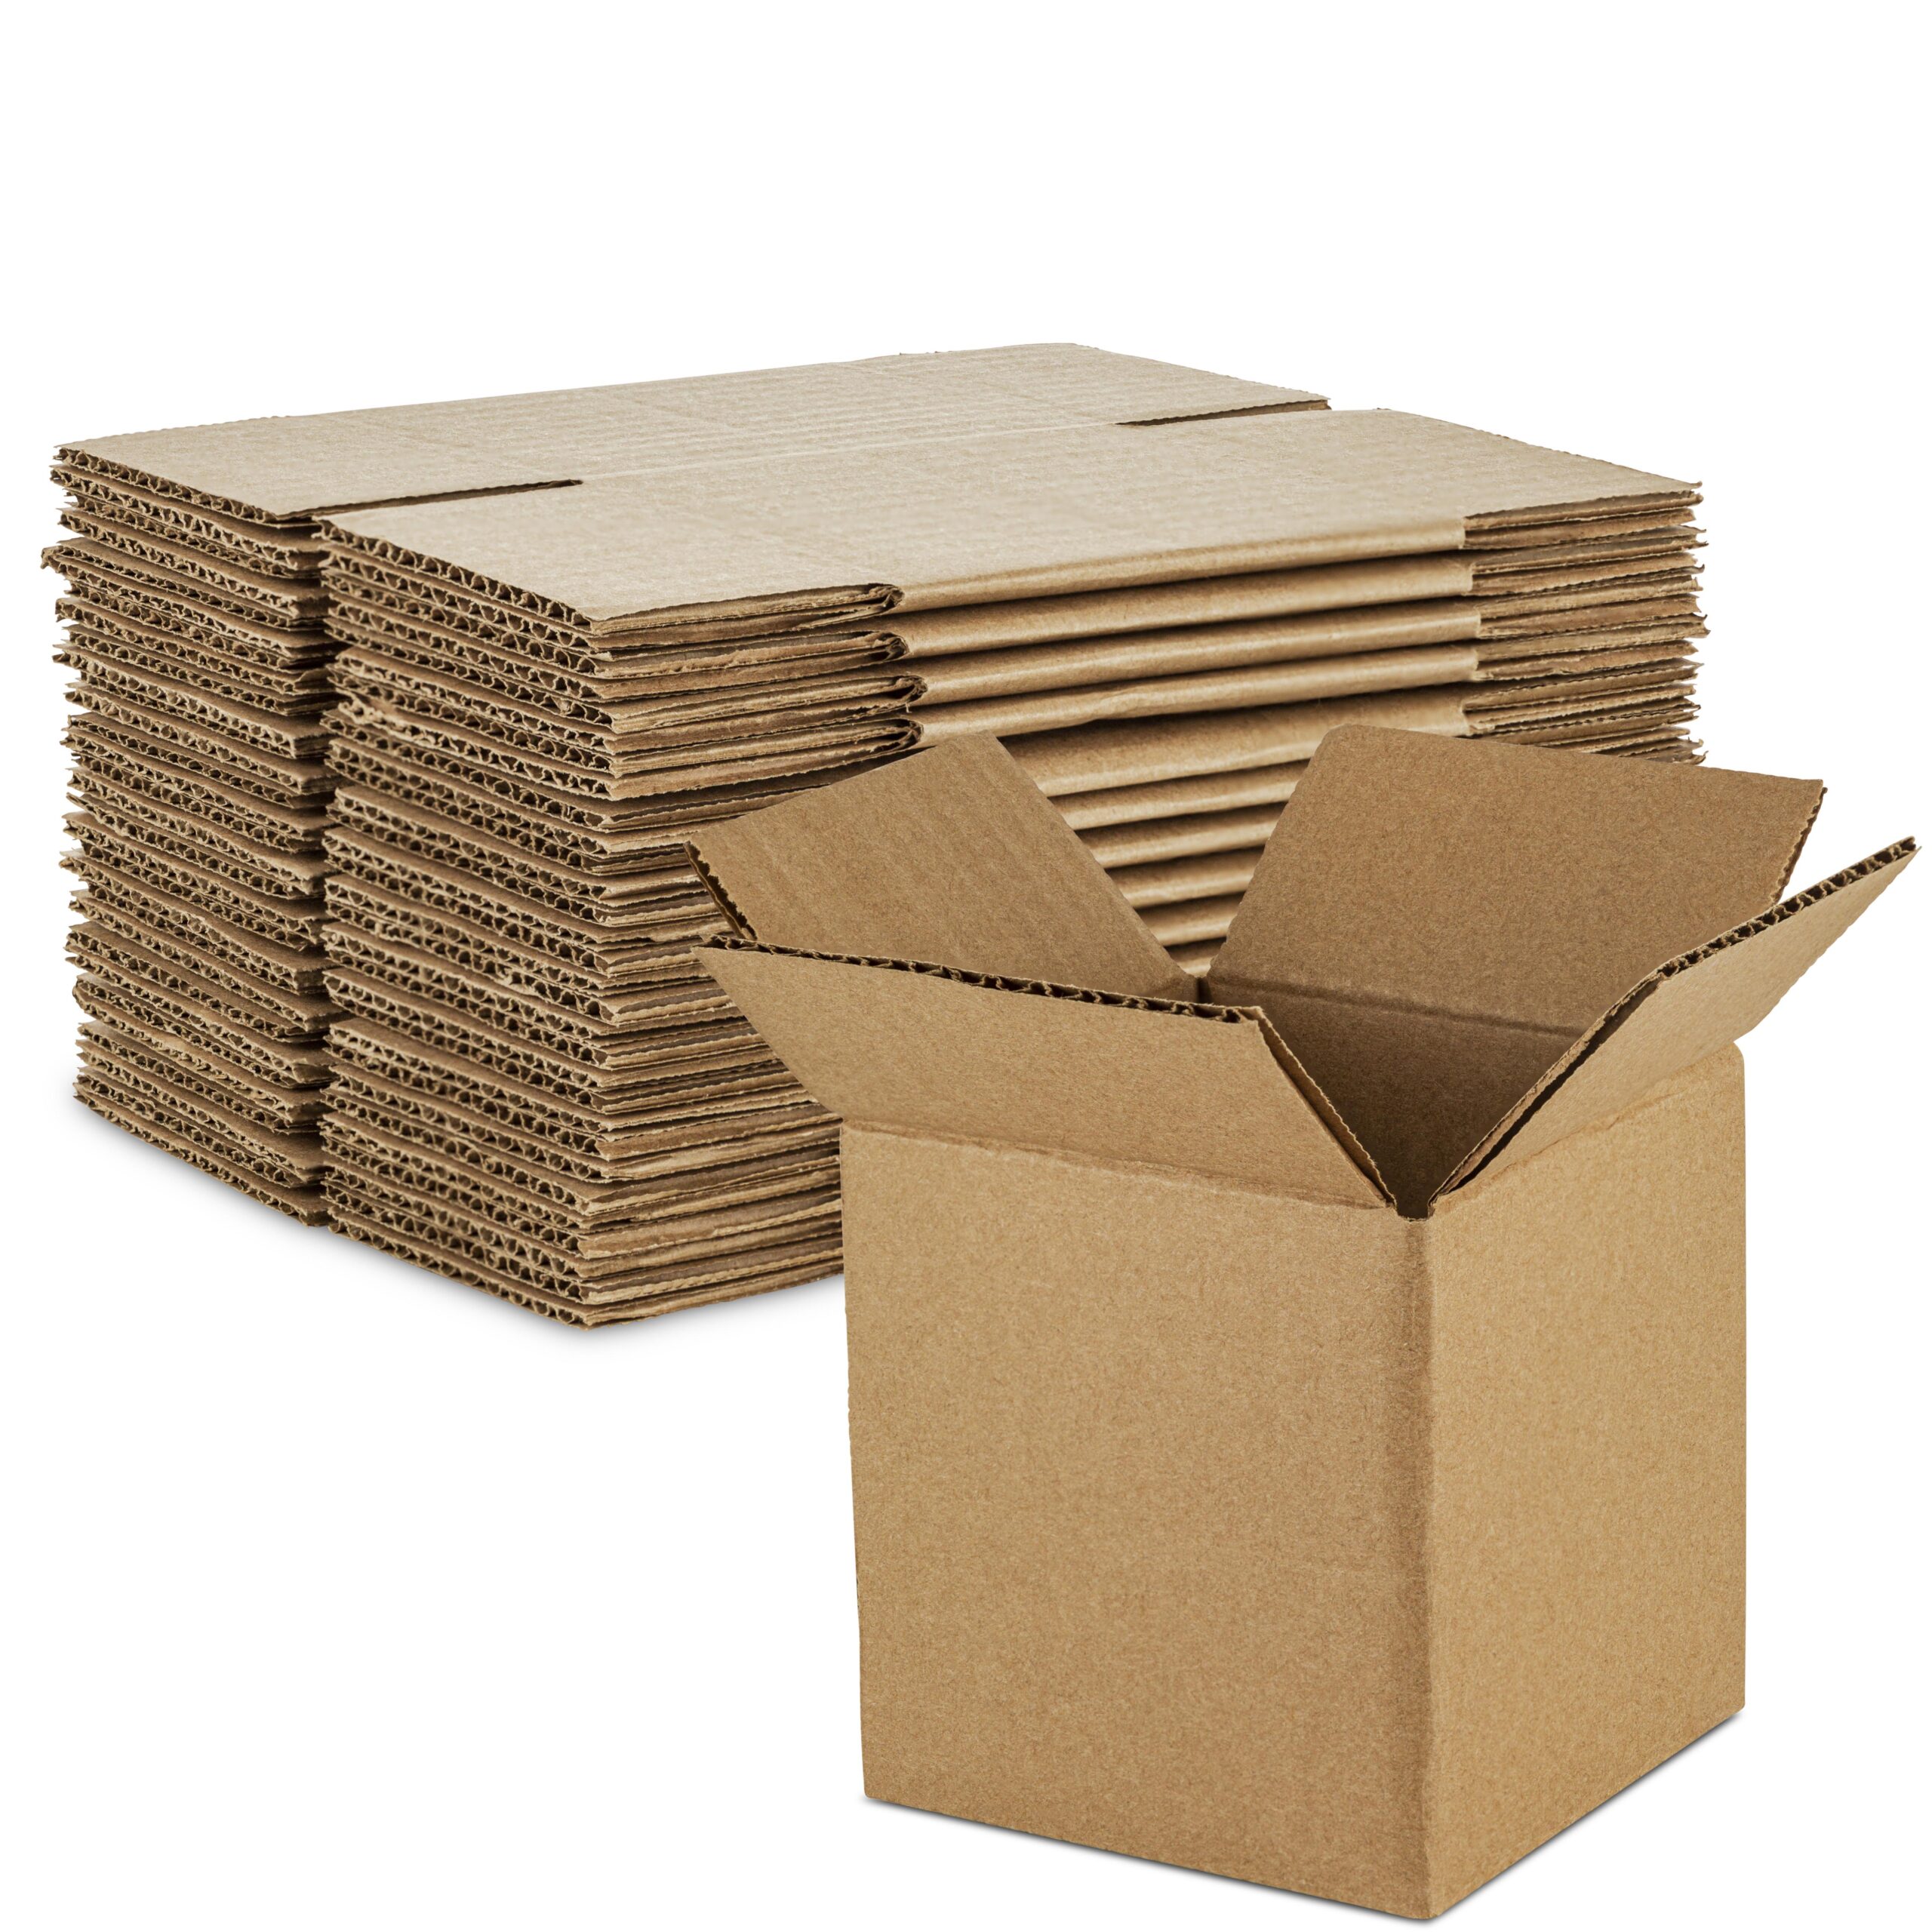 100 Small Mailing Boxes Bulk, Corrugated Boxes for Product Packaging, Eco  Friendly Cardboard Shipping Boxes Supplies 